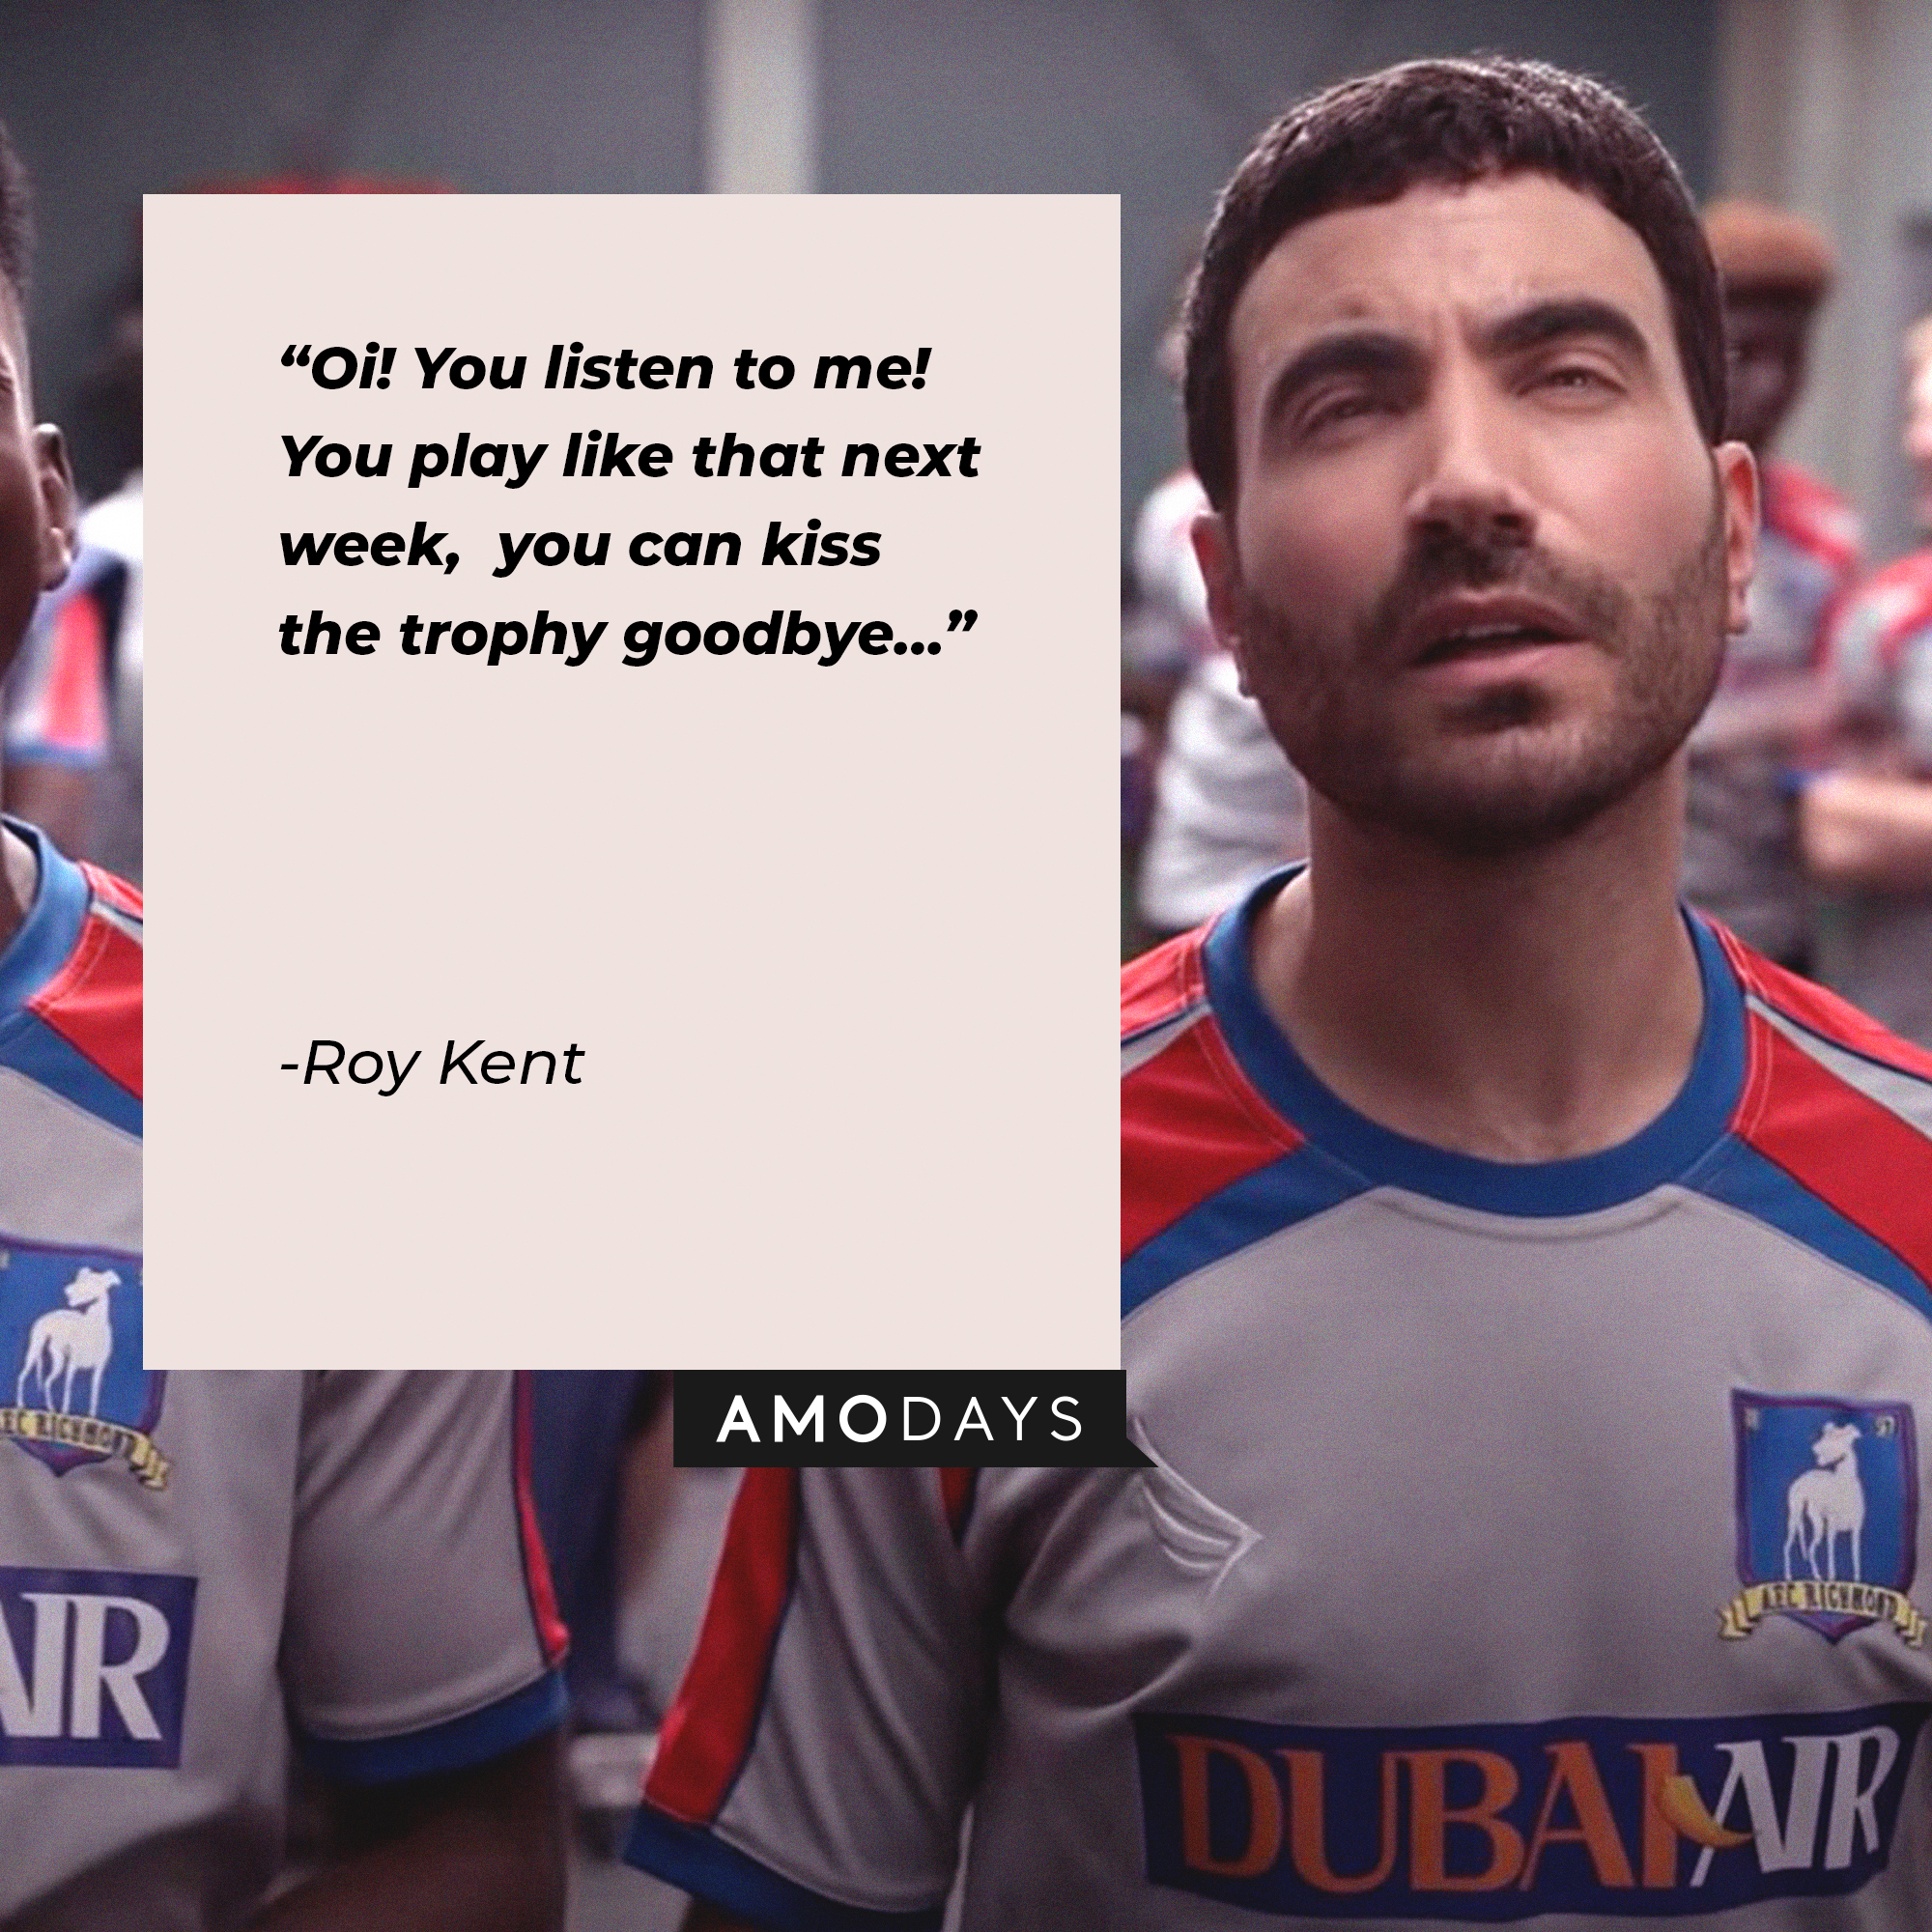 Roy Kent’s quote: "Oi! You listen to me! You play like that next week; you can kiss the trophy goodbye…"  | Image: AmoDays